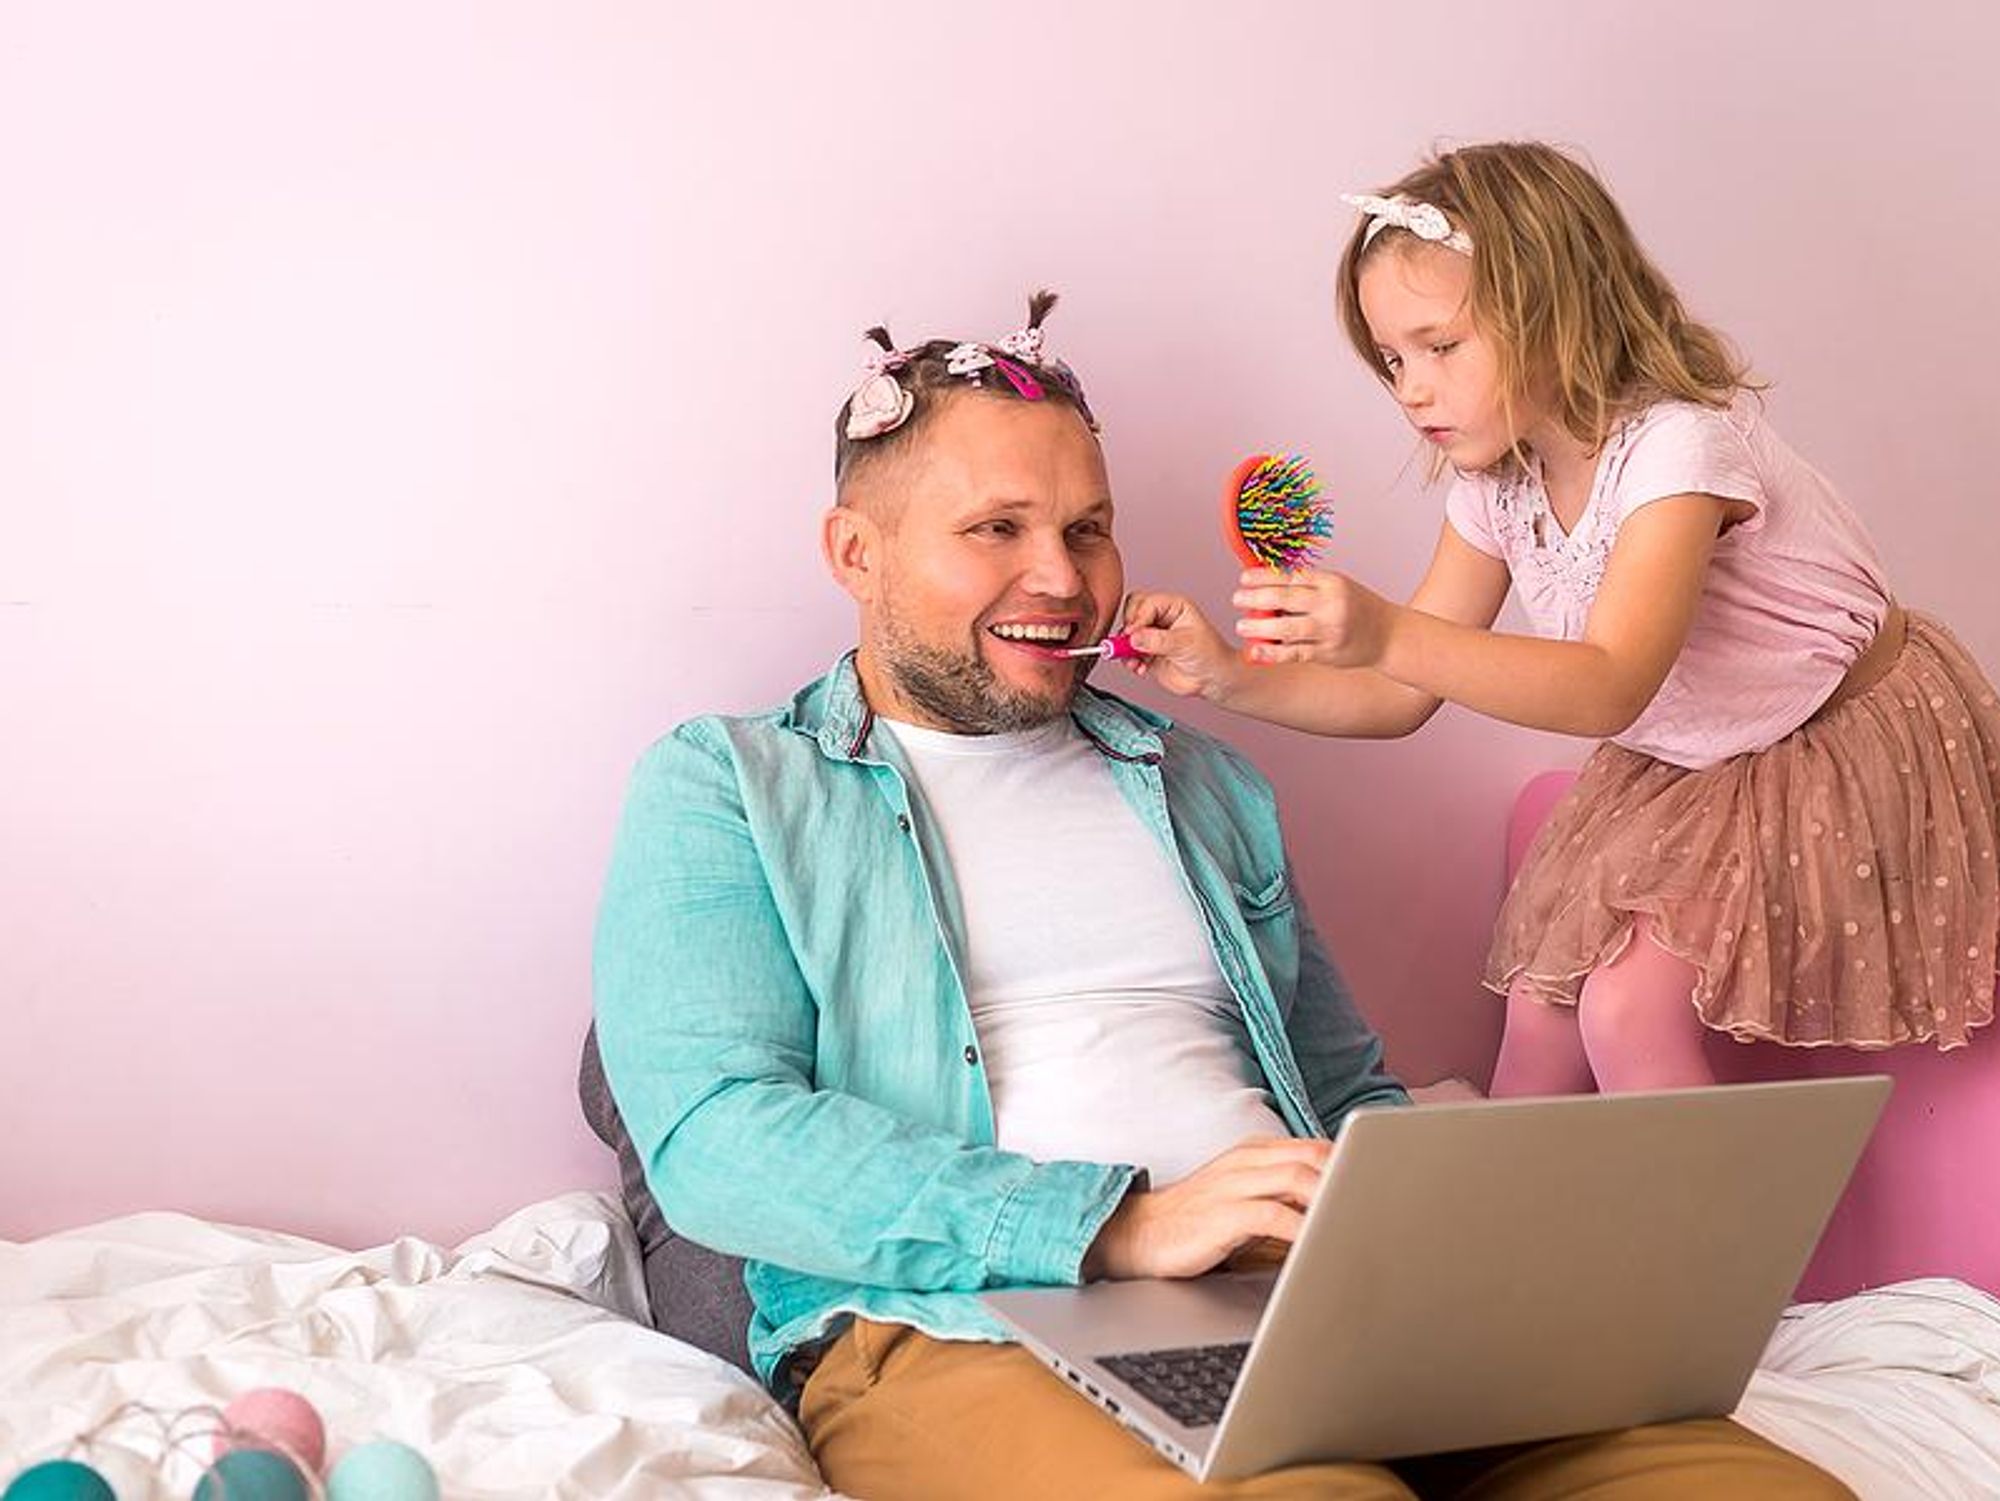 Working dad with a low-stress remote job